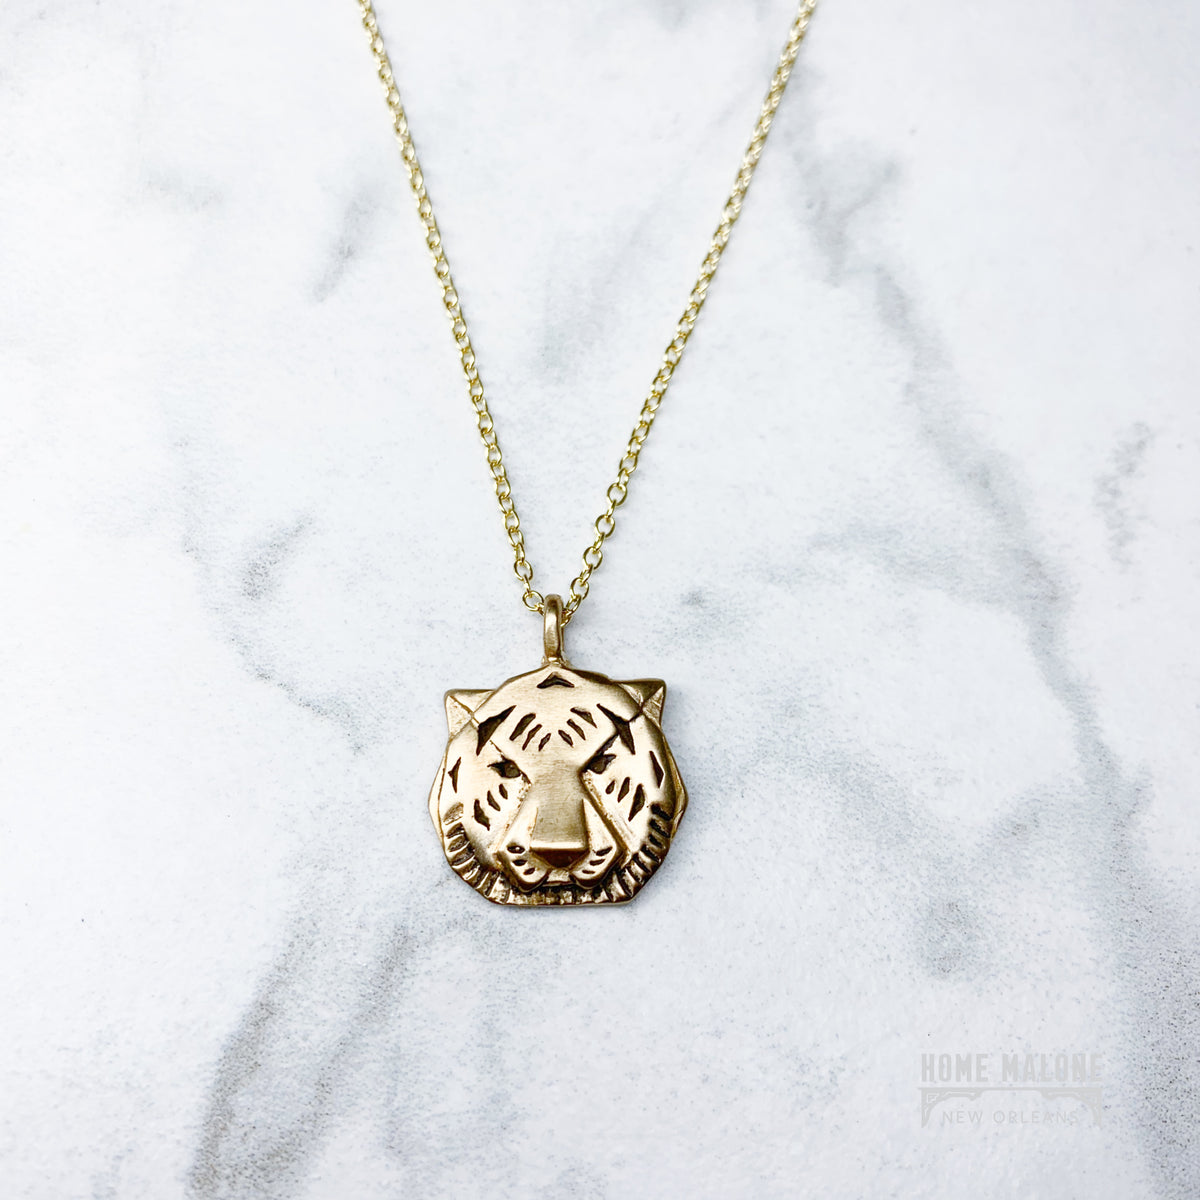 Buy Gold Tiger Necklace Small Tiger Charm AC Gold Jewelry Online in India -  Etsy